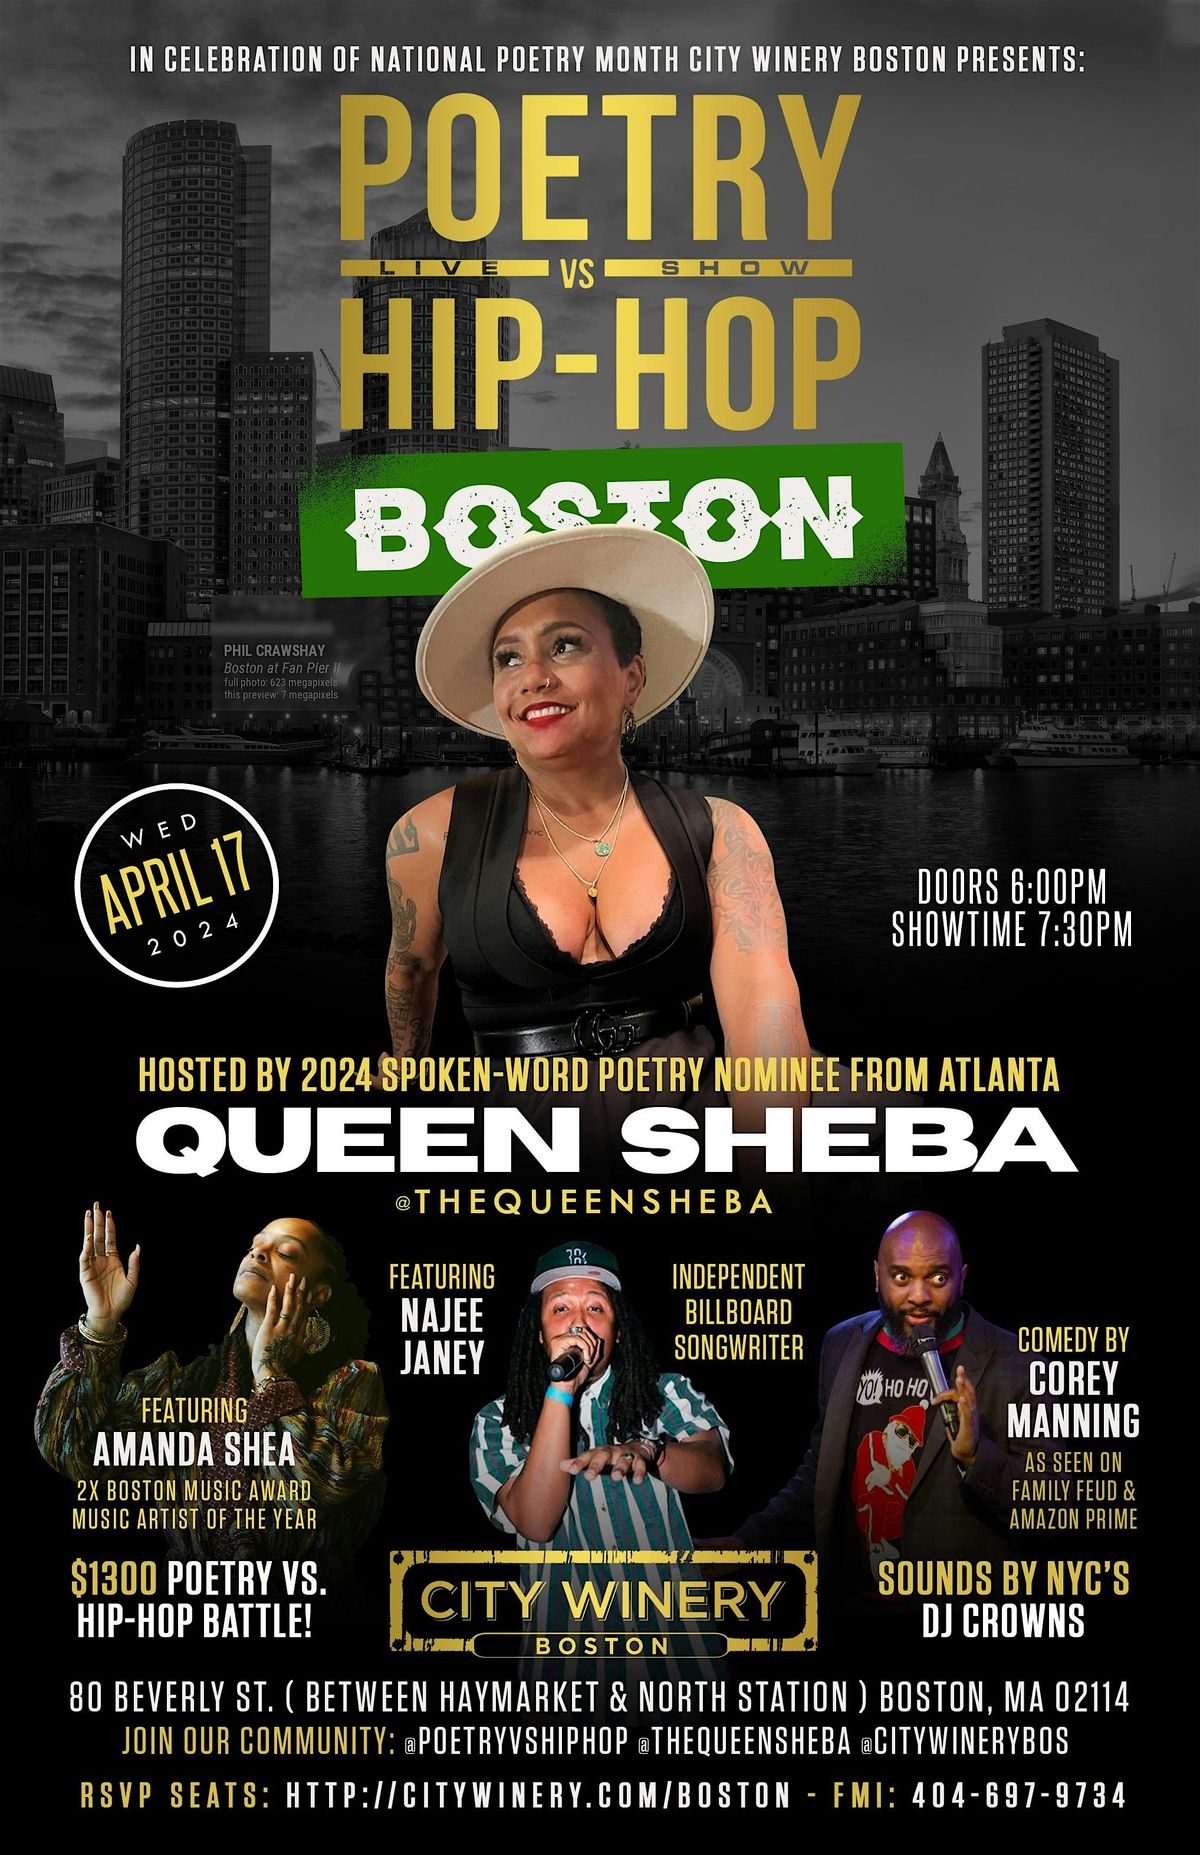 City Winery Boston Presents: Poetry vs. Hip-Hop for N'Tl Poetry Month!